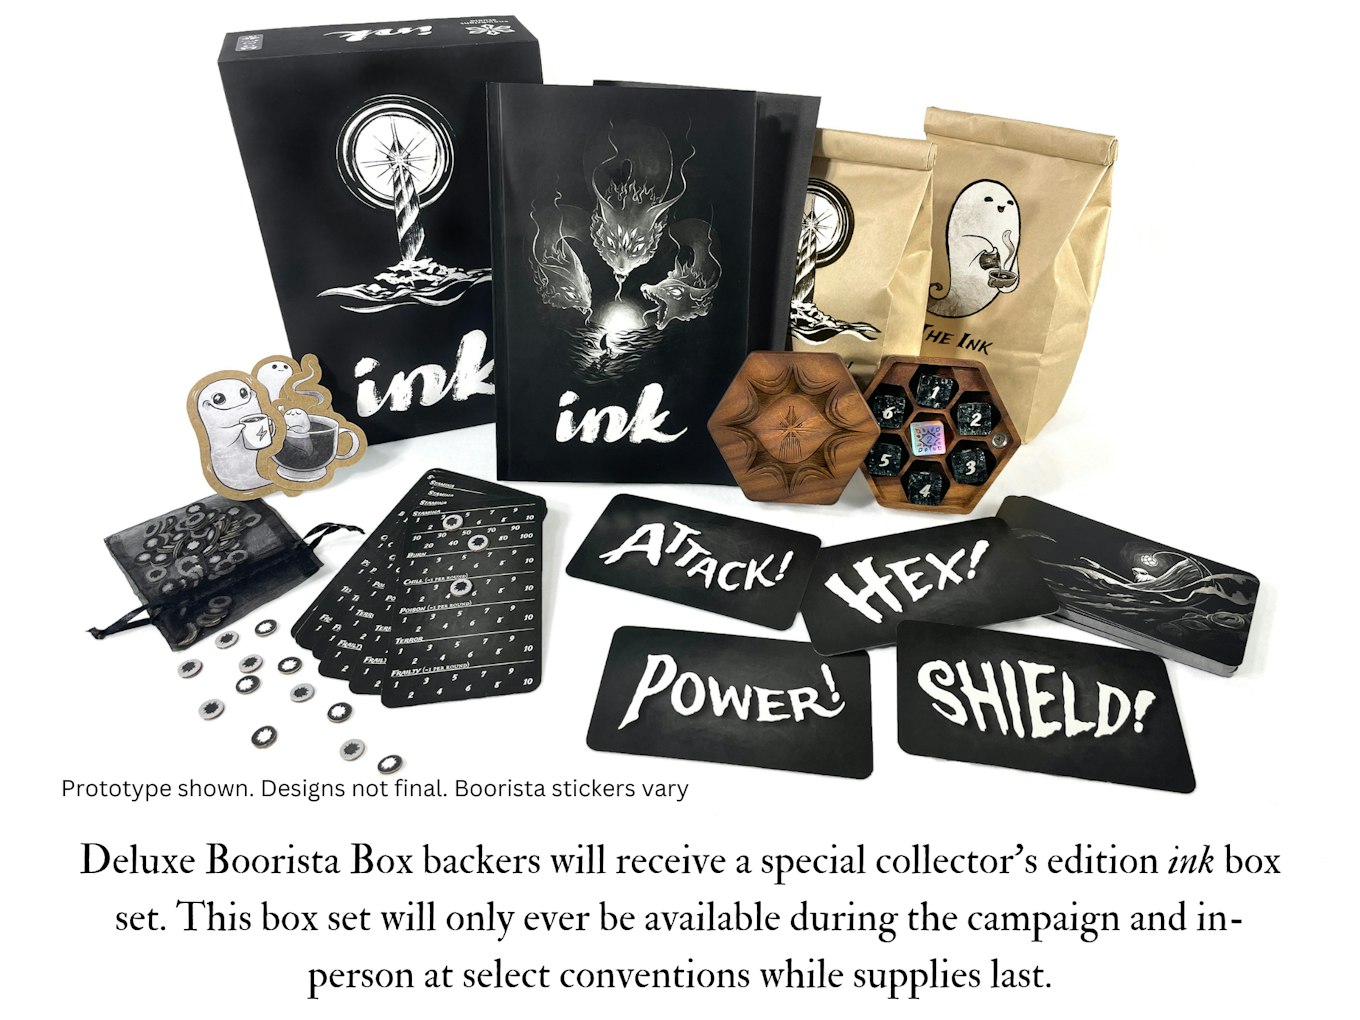 Deluxe Boorista Box backers will receive a special collector’s edition ink box set. This box set will only ever be available during the campaign and in-person at select conventions while supplies last. image of book, tokens, cards, stickers coffee and dice with dice box